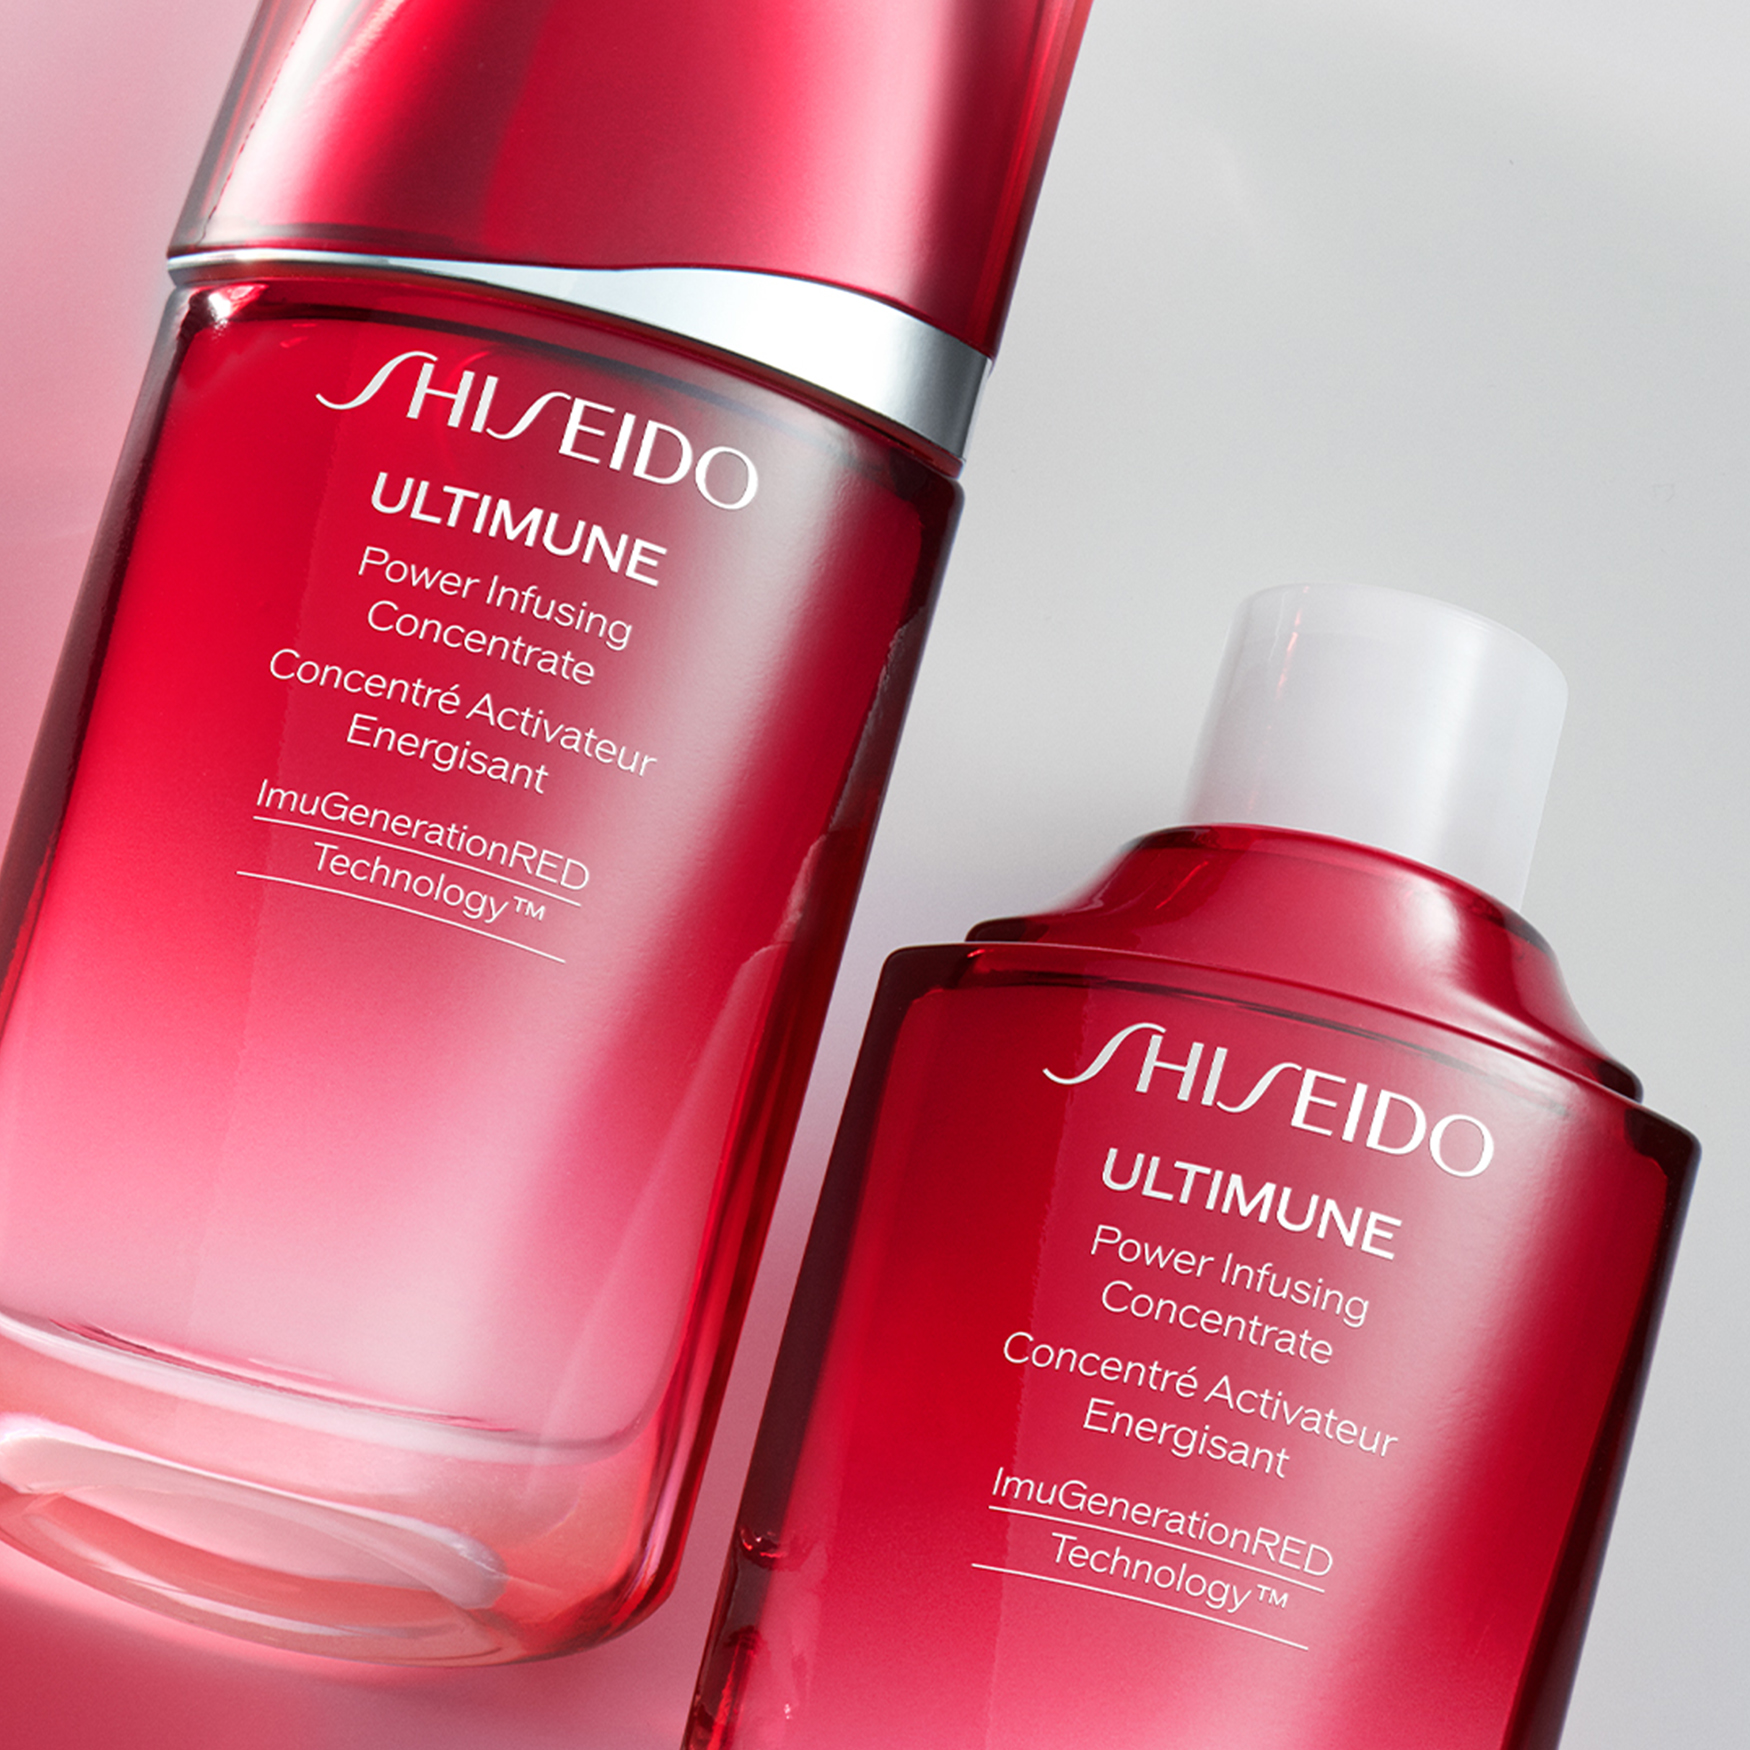 Shiseido power infusing concentrate. Ultimune концентрат шисейдо. Ultimune концентрат шисейдо Power infusing. Shiseido Ultimate Power infusing Concentrate. Концентрат для лица Shiseido Ultimune.